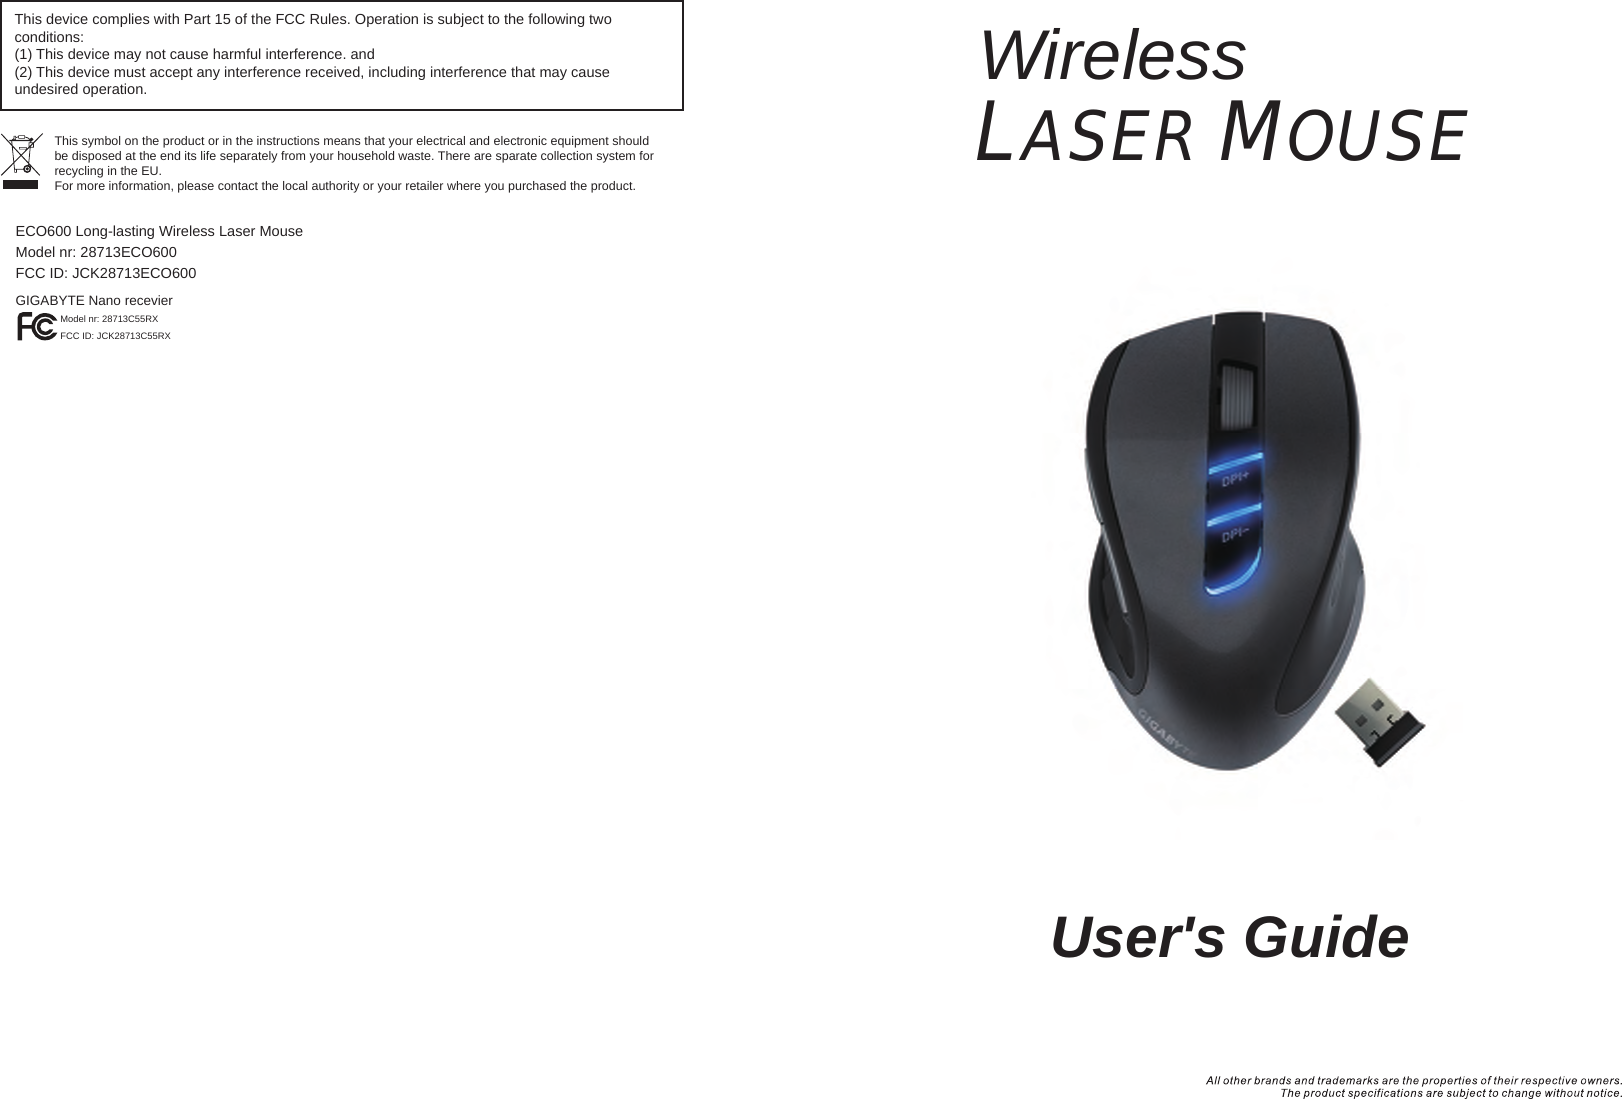 WirelessLASER MOUSE  User&apos;s GuideThis device complies with Part 15 of the FCC Rules. Operation is subject to the following two conditions:(1) This device may not cause harmful interference. and (2) This device must accept any interference received, including interference that may cause undesired operation.This symbol on the product or in the instructions means that your electrical and electronic equipment should be disposed at the end its life separately from your household waste. There are sparate collection system for recycling in the EU.For more information, please contact the local authority or your retailer where you purchased the product.ECO600 Long-lasting Wireless Laser MouseModel nr: 28713ECO600  FCC ID: JCK28713ECO600GIGABYTE Nano recevierModel nr: 28713C55RXFCC ID: JCK28713C55RX